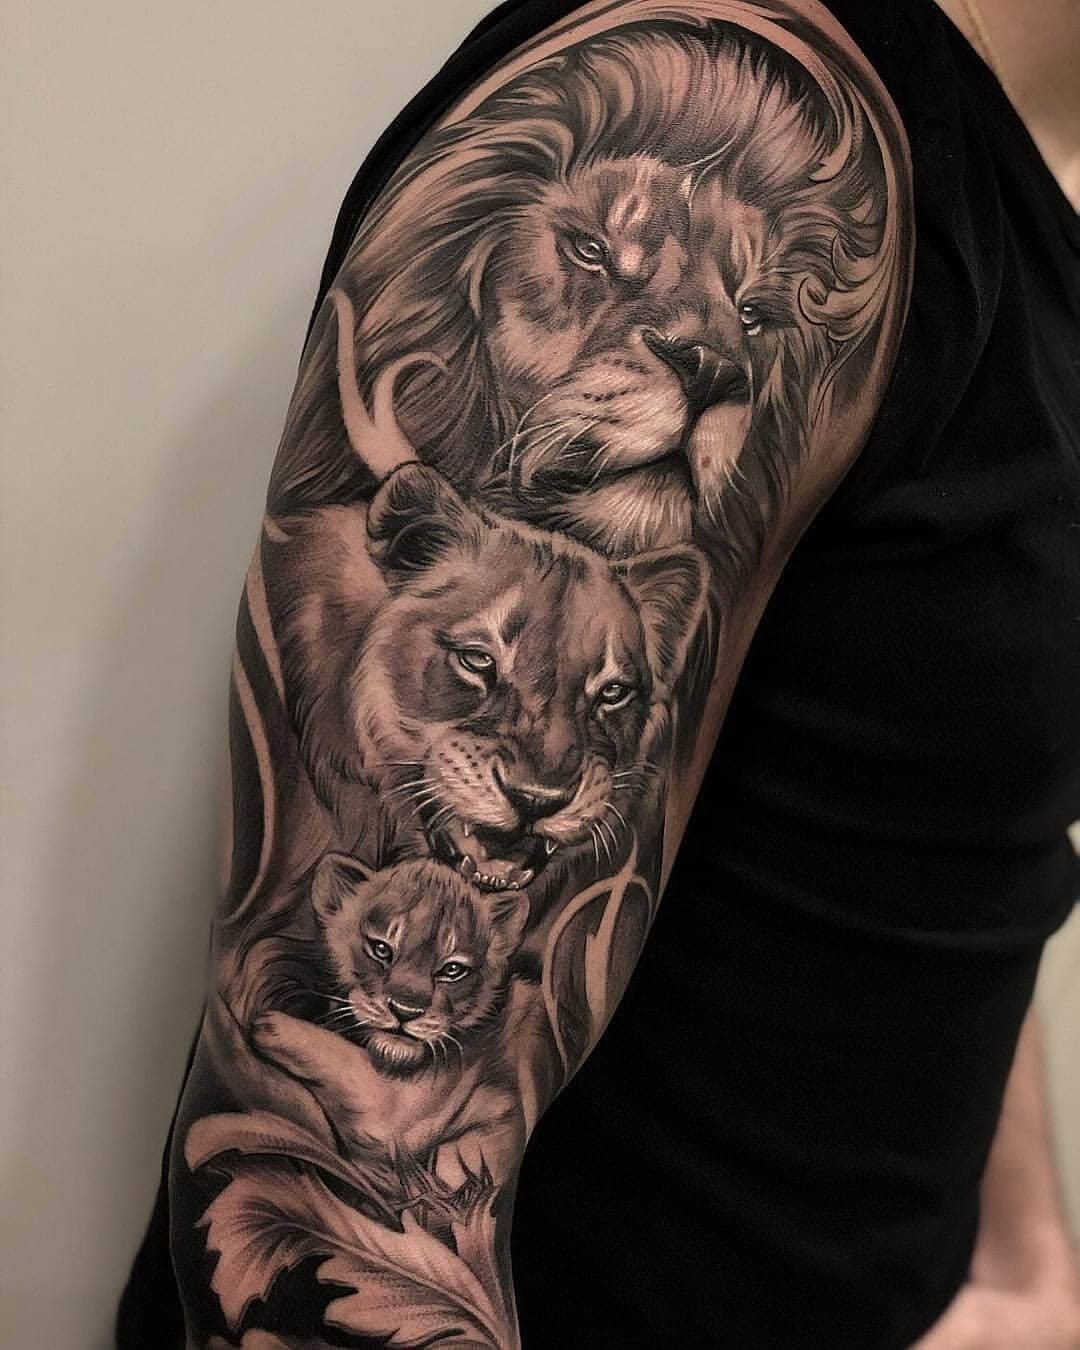 Discover 90+ about lion cub tattoo best .vn